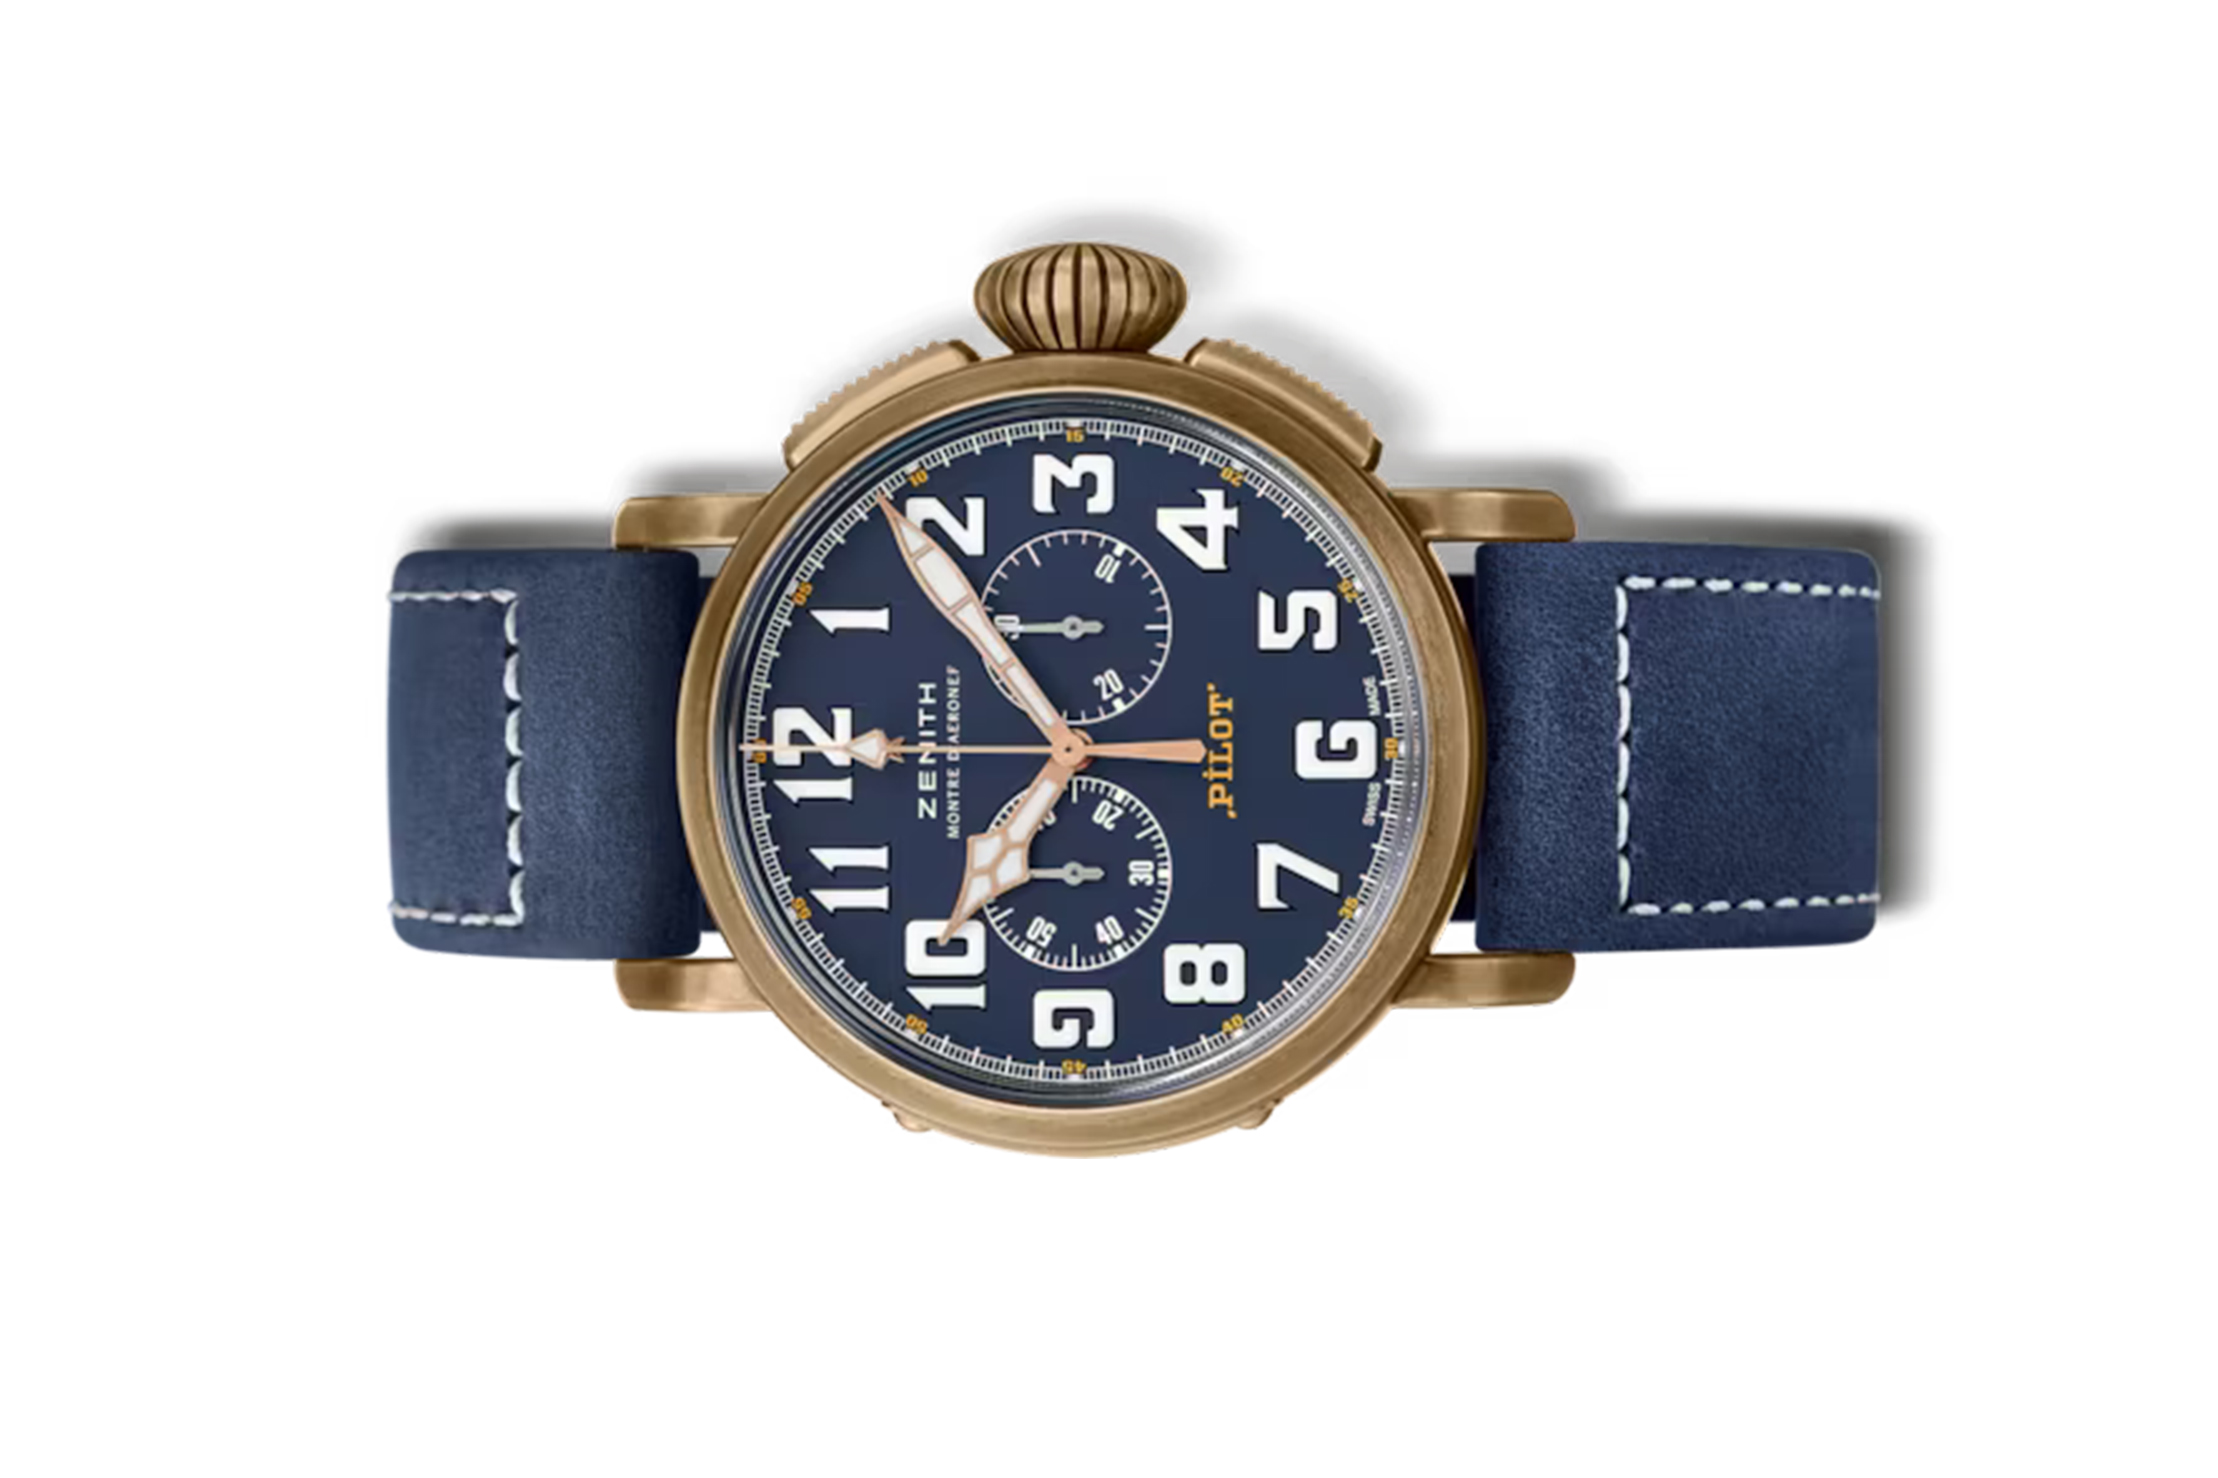 Đồng Hồ Zenith Pilot Type 20 Chronograph Extra Special 29.2430.4069/57.C808